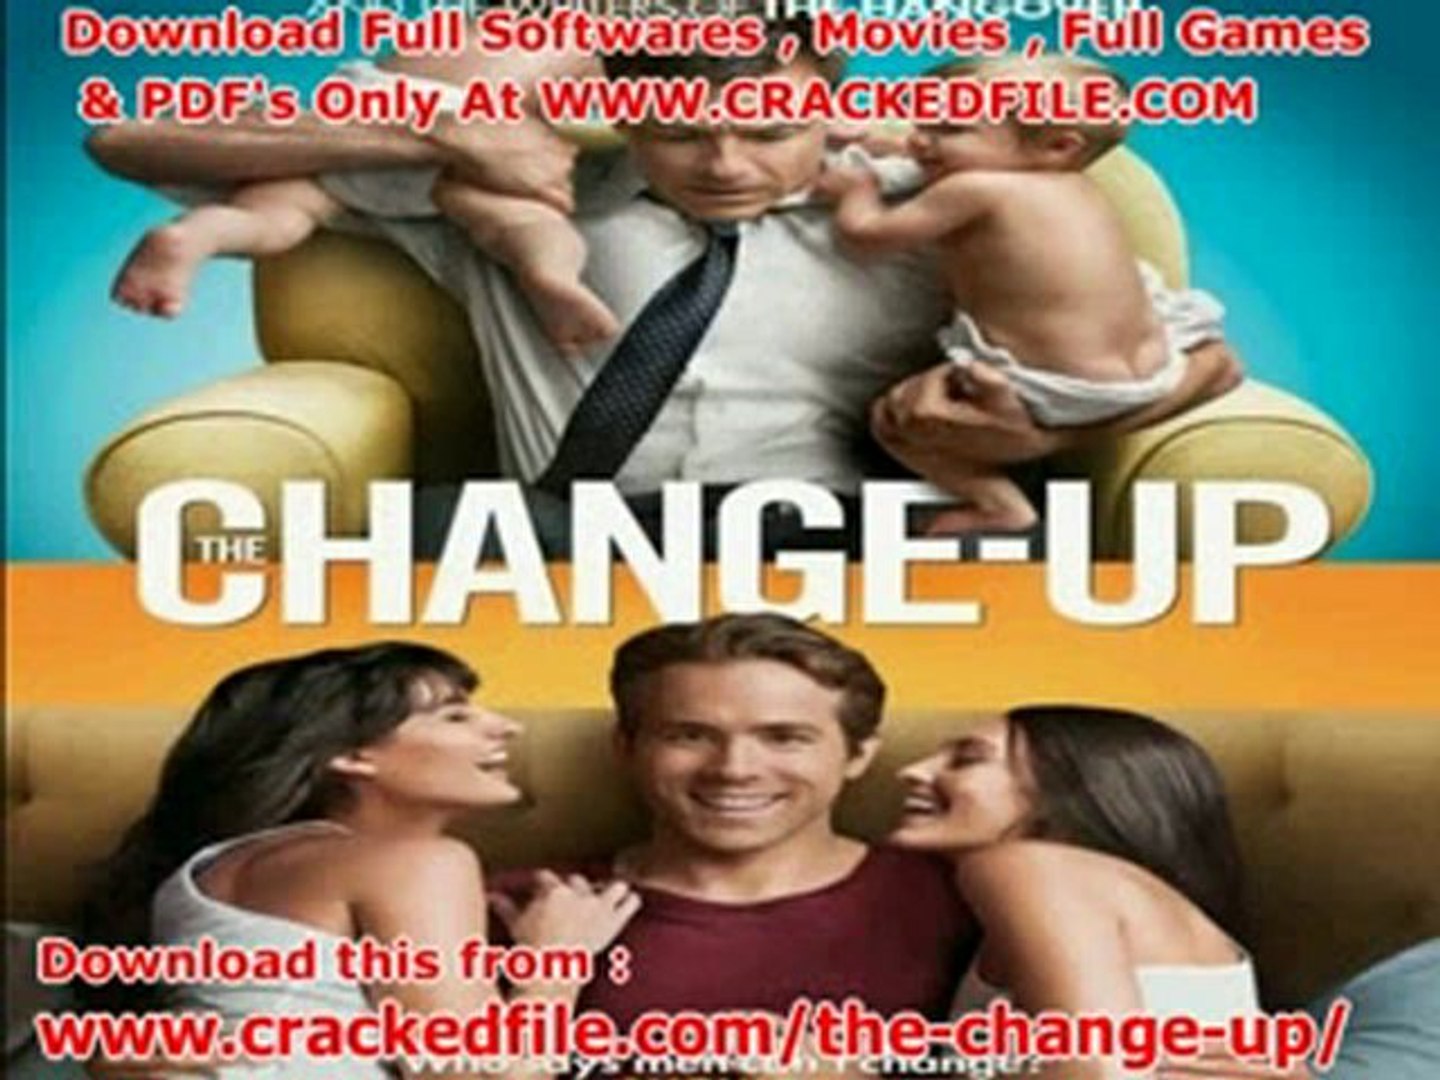 Streaming The Change Up 2011 Full Movies Online